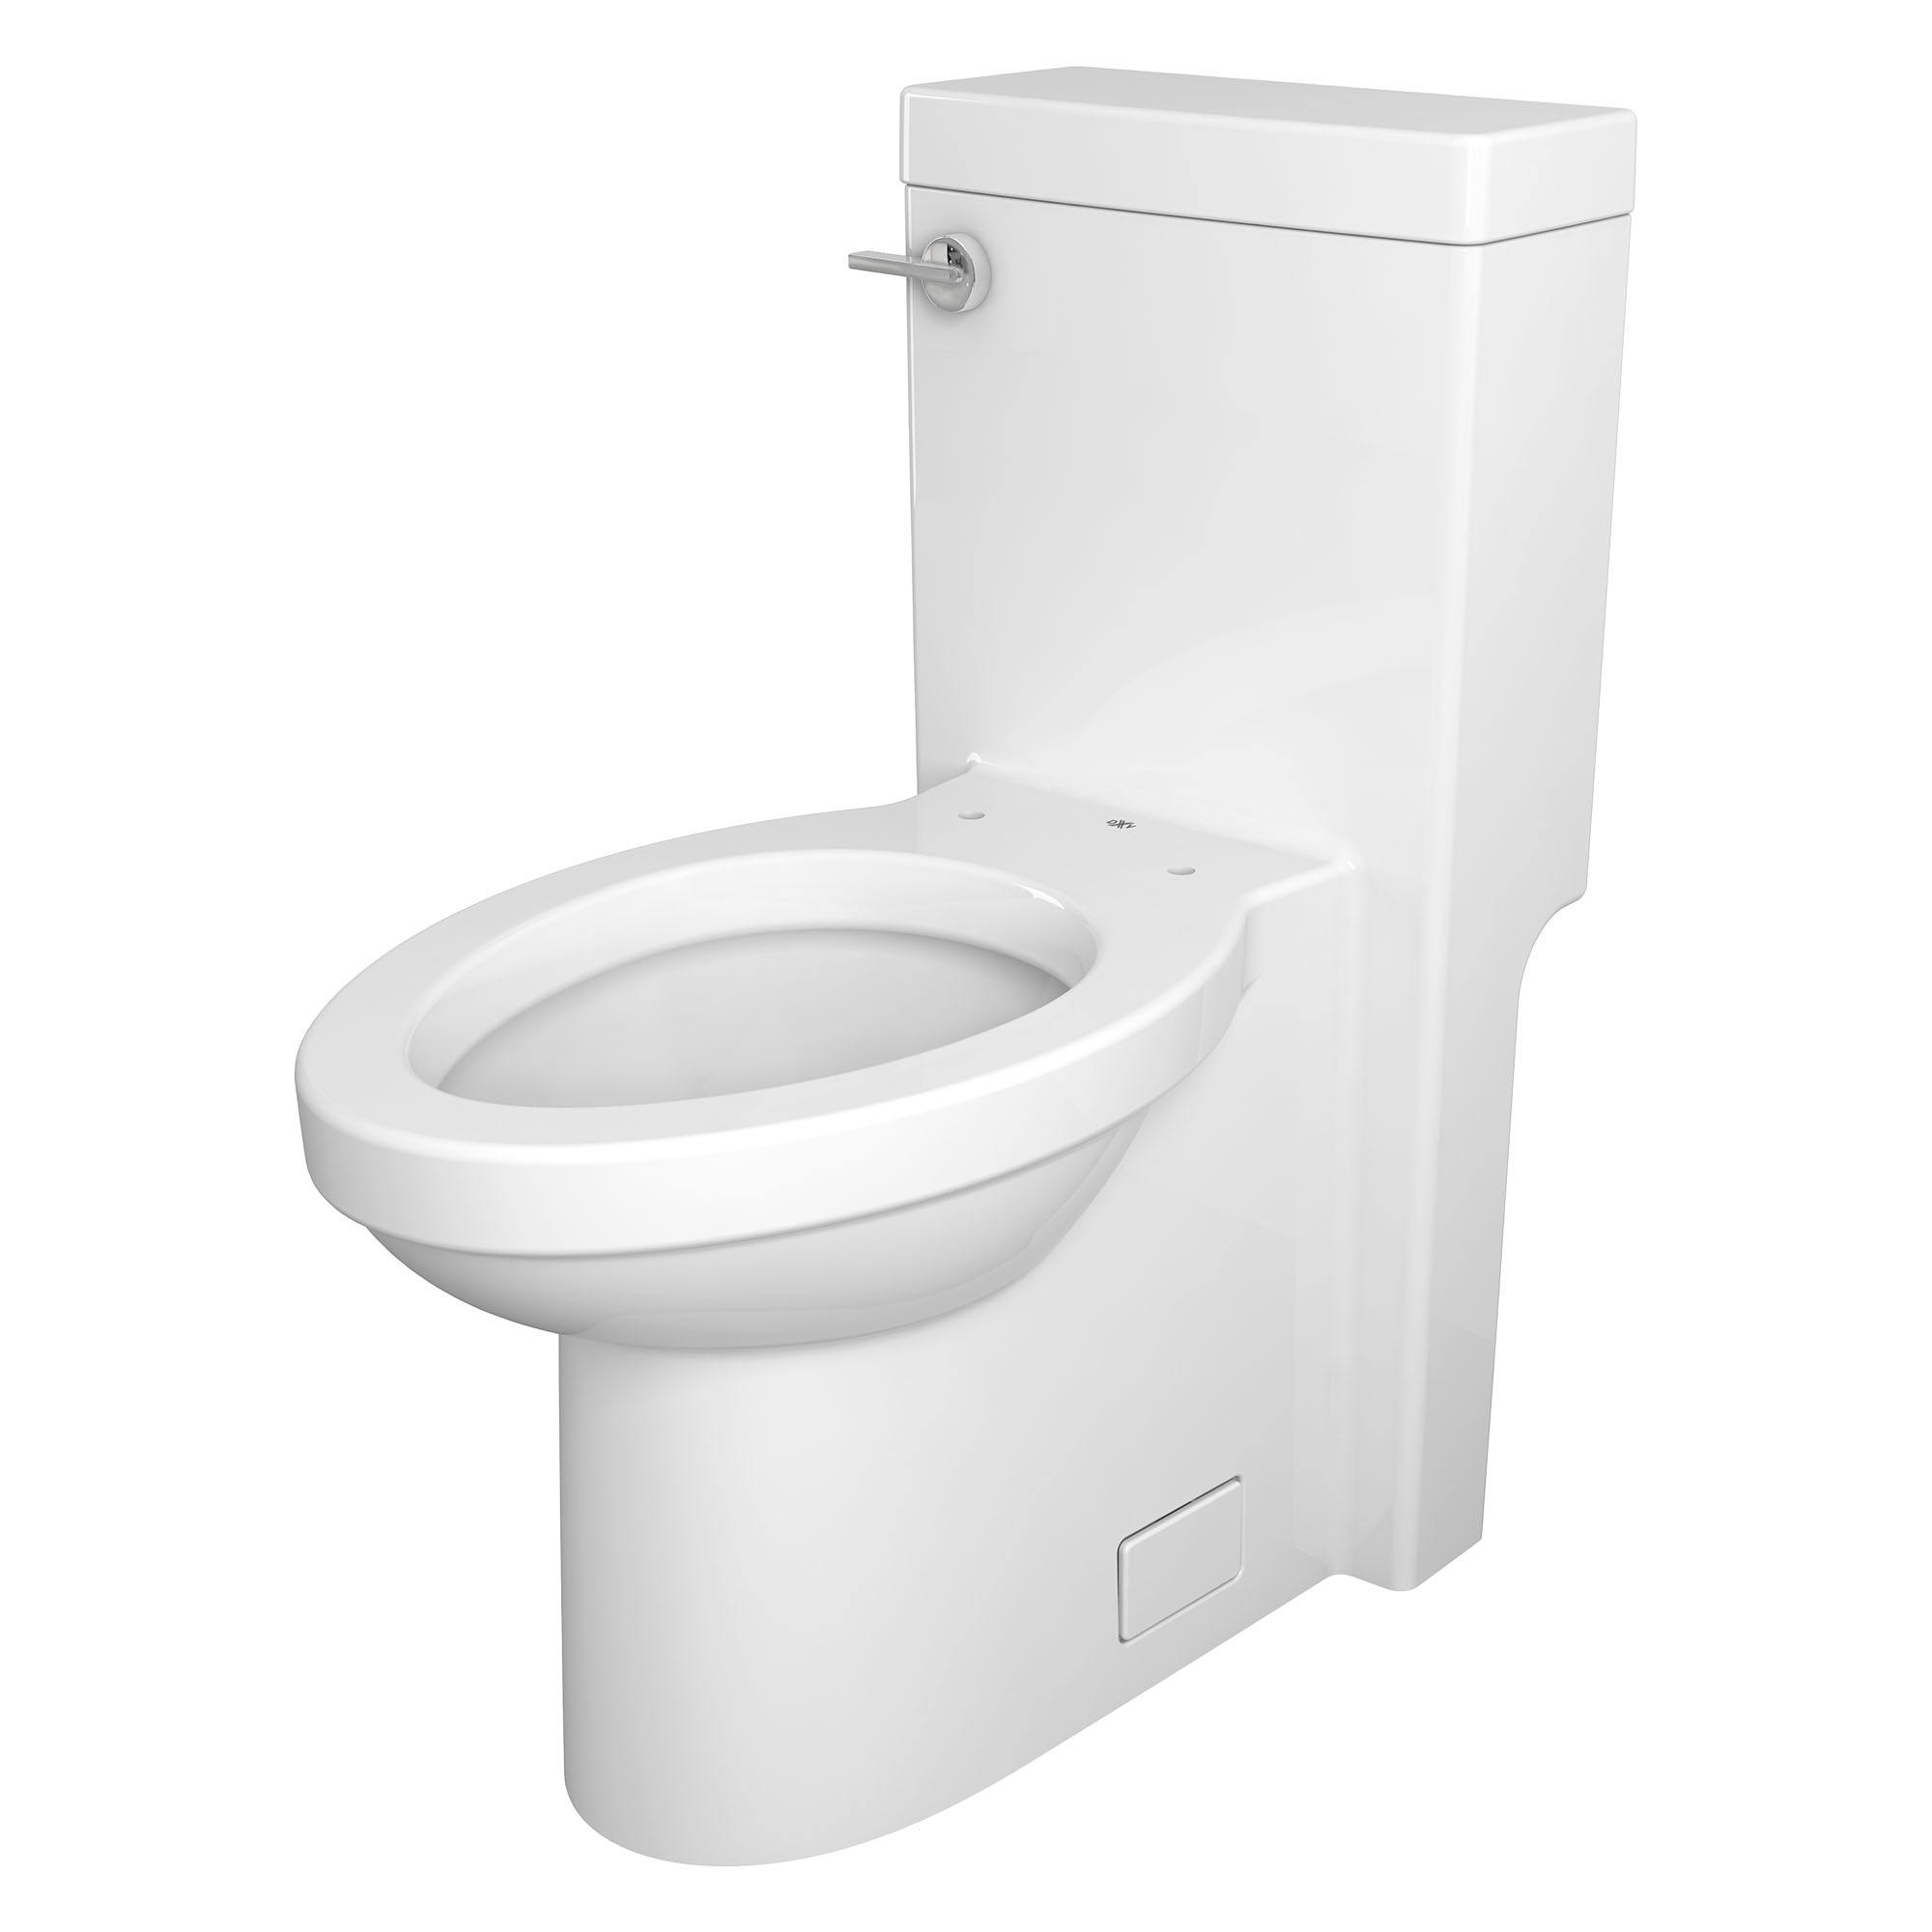 Cossu® One-Piece Chair-Height Left-Hand Trip Lever Elongated Toilet with Seat